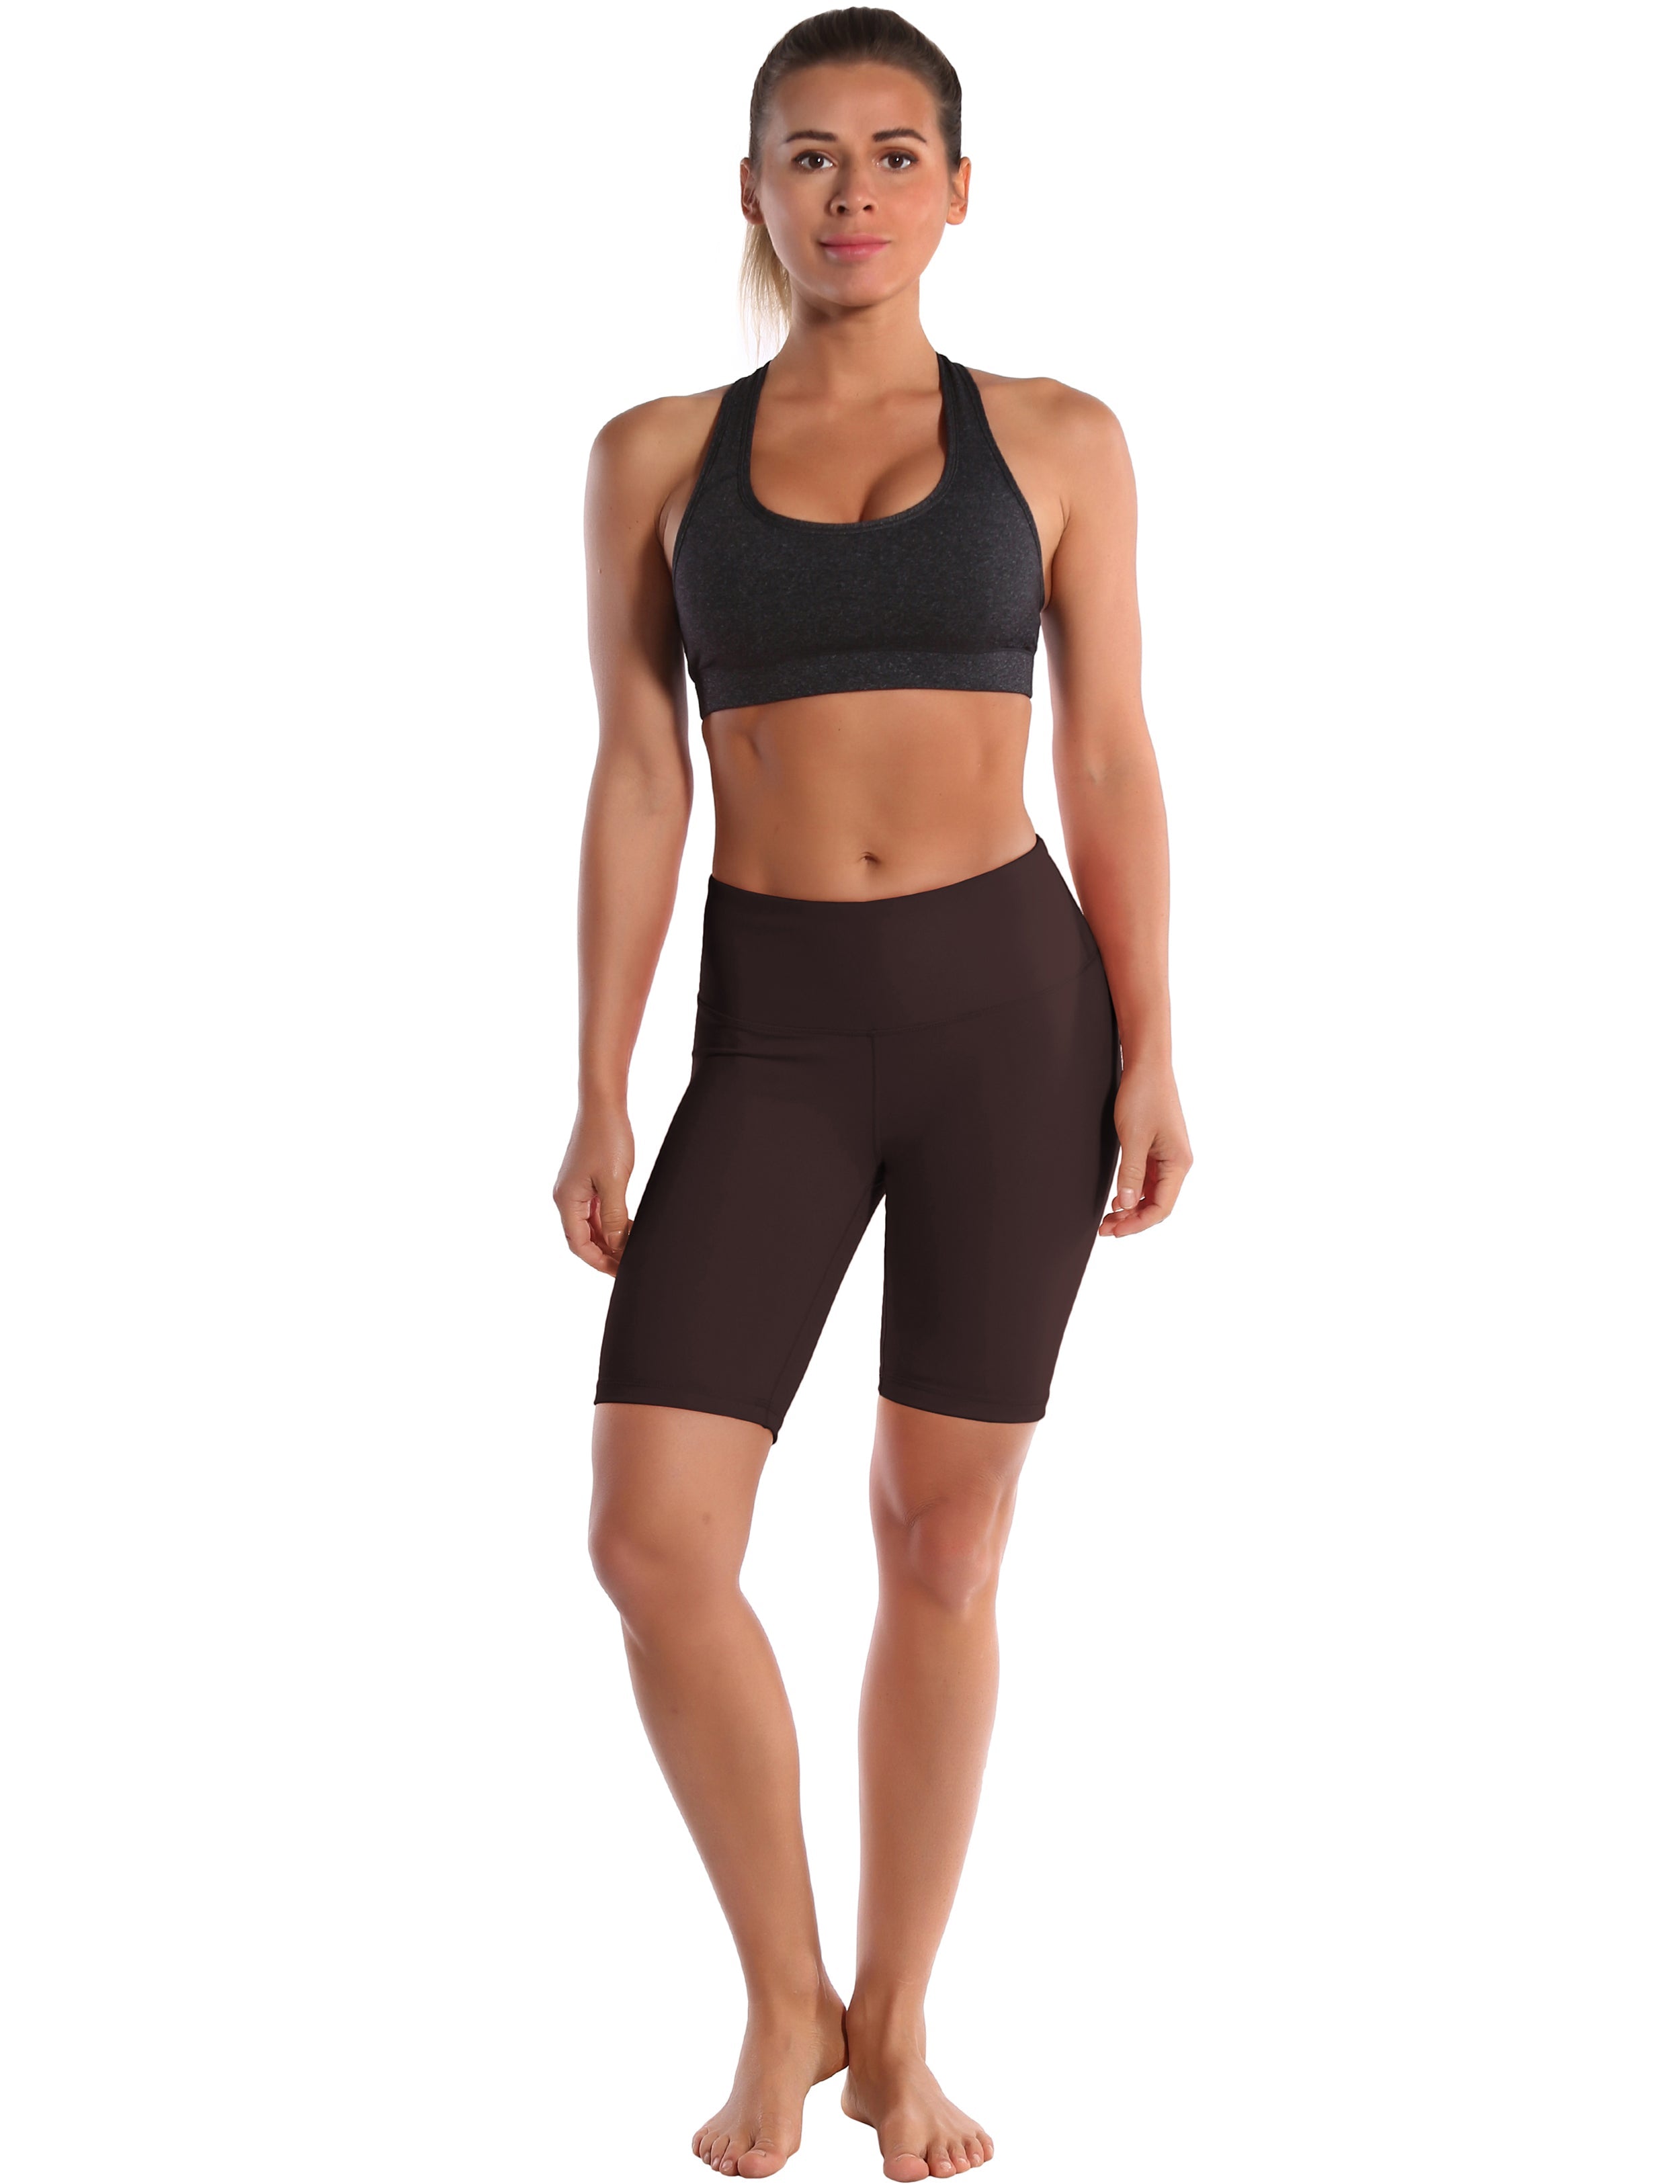 8" High Waist Pilates Shorts mahoganymaroon Sleek, soft, smooth and totally comfortable: our newest style is here. Softest-ever fabric High elasticity High density 4-way stretch Fabric doesn't attract lint easily No see-through Moisture-wicking Machine wash 75% Nylon, 25% Spandex